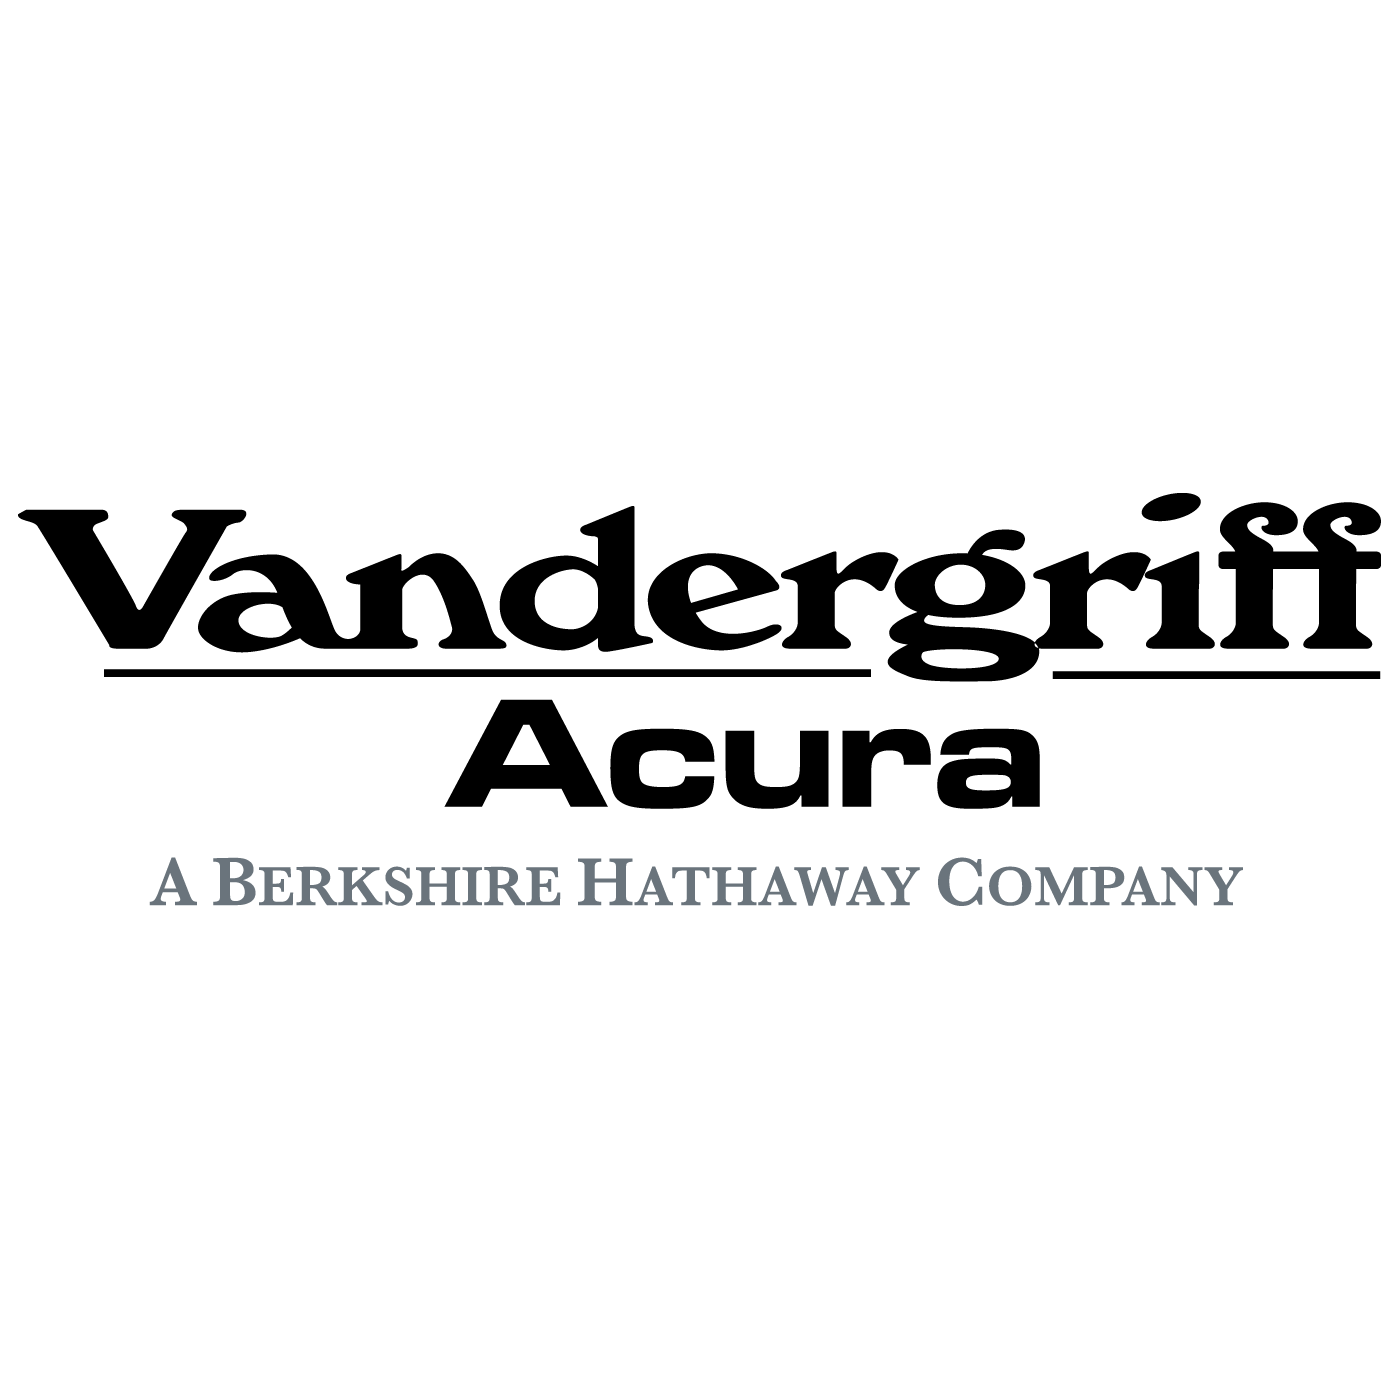 Established in 1997, Vandergriff Acura is a dealership committed to delivering top-notch customer satisfaction.